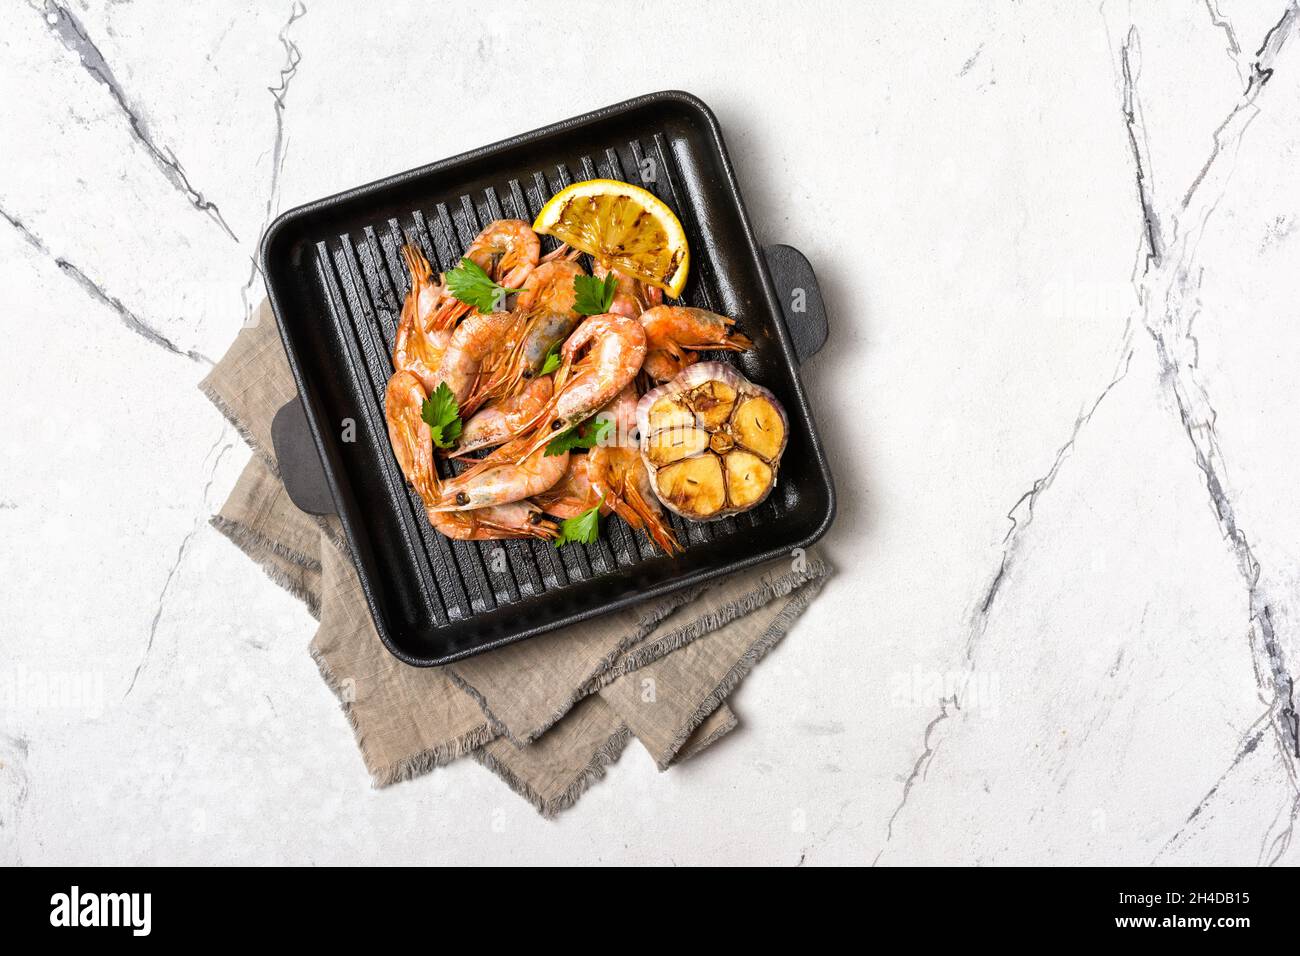 Top view of grilled shrimps on cast iron skillet or pan with spice, fried lemon and garlic on white marble background Stock Photo